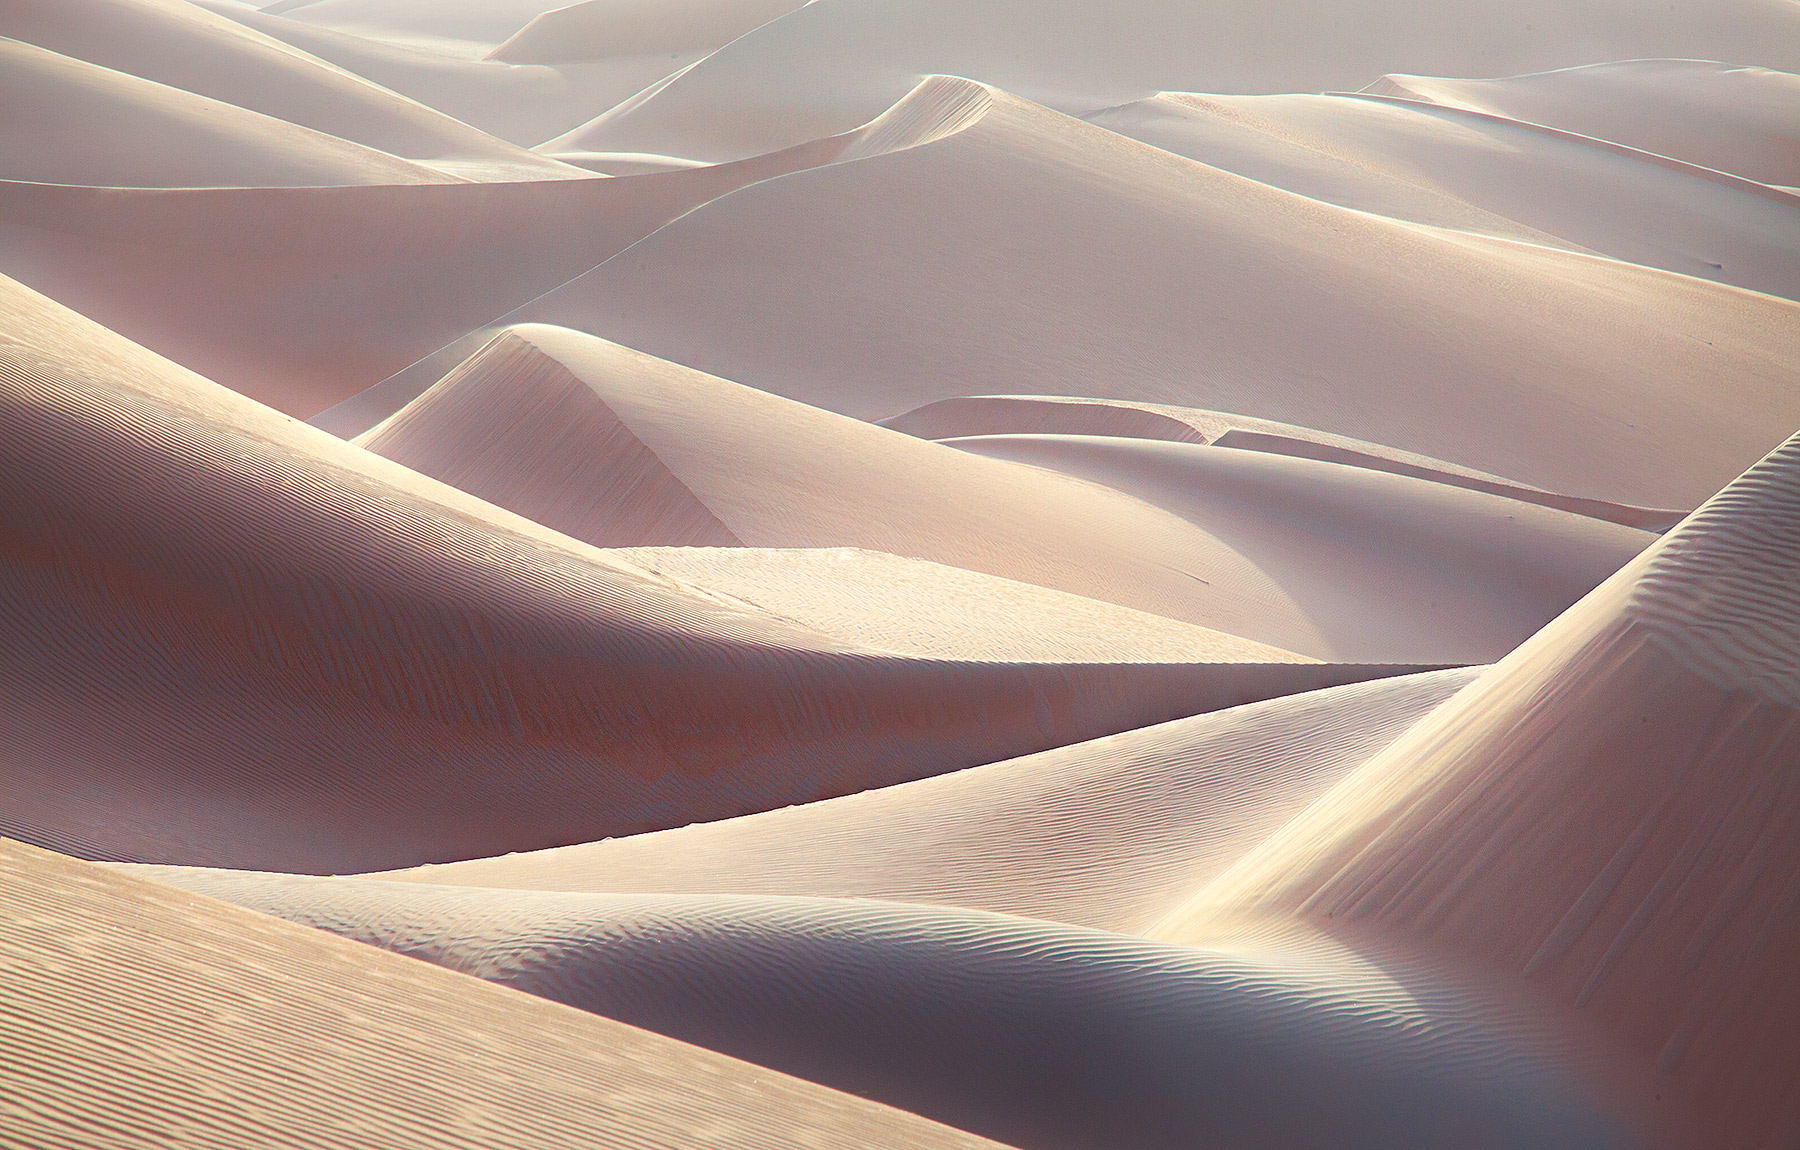 Softly diffused light across the remarkable expanse of dunes stretching across the Empty Quarter, United Arab Emirates.